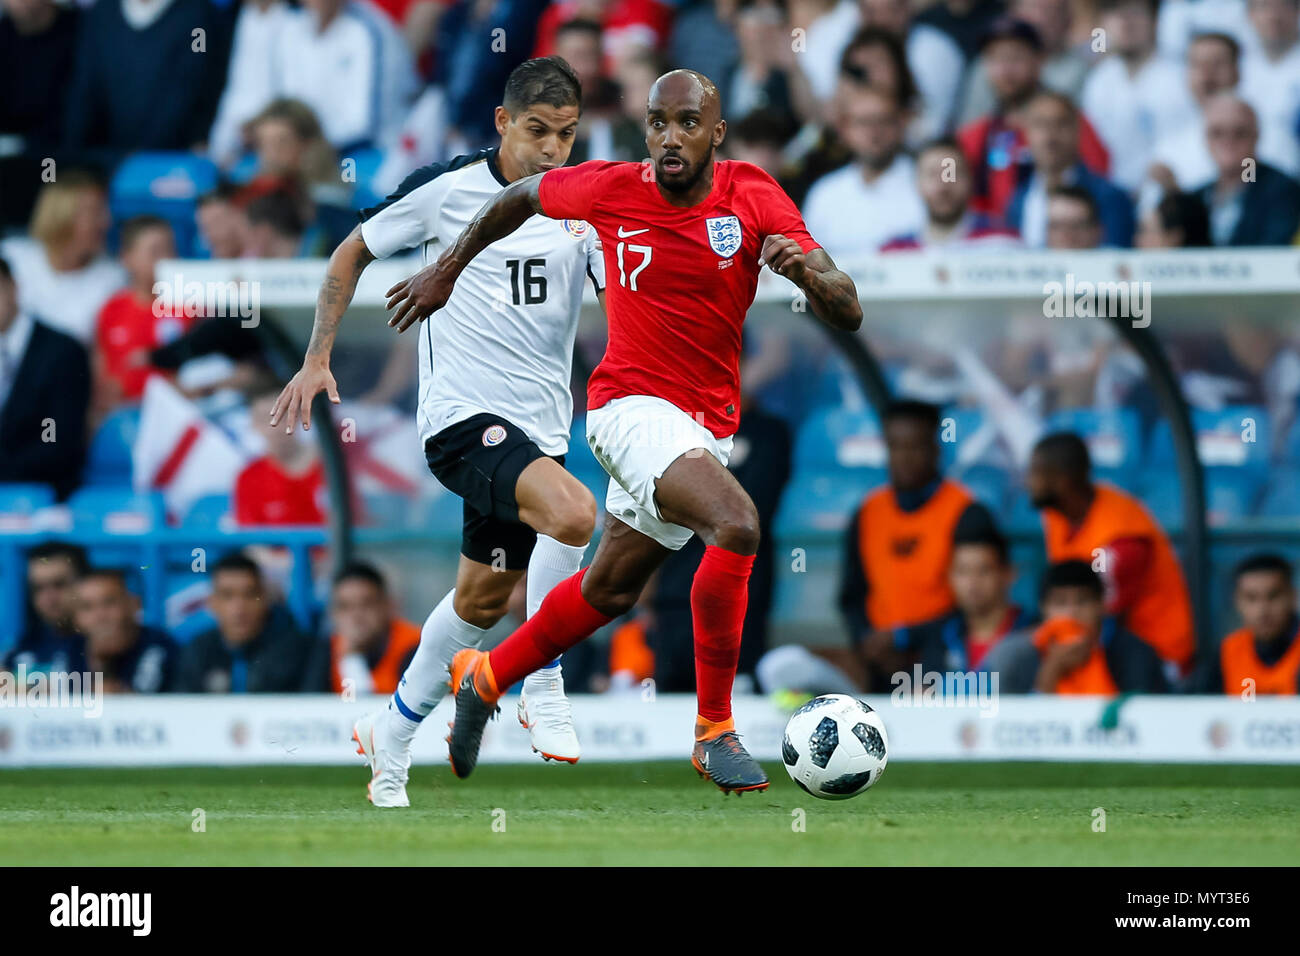 Leeds, UK. 7th Jun, 2018. Fabian Delph of England and Cristian Gamboa of Costa Rica during the International Friendly match between England and Costa Rica at Elland Road on June 7th 2018 in Leeds, England. (Photo by Daniel Chesterton/phcimages) Credit: PHC Images/Alamy Live News Stock Photo